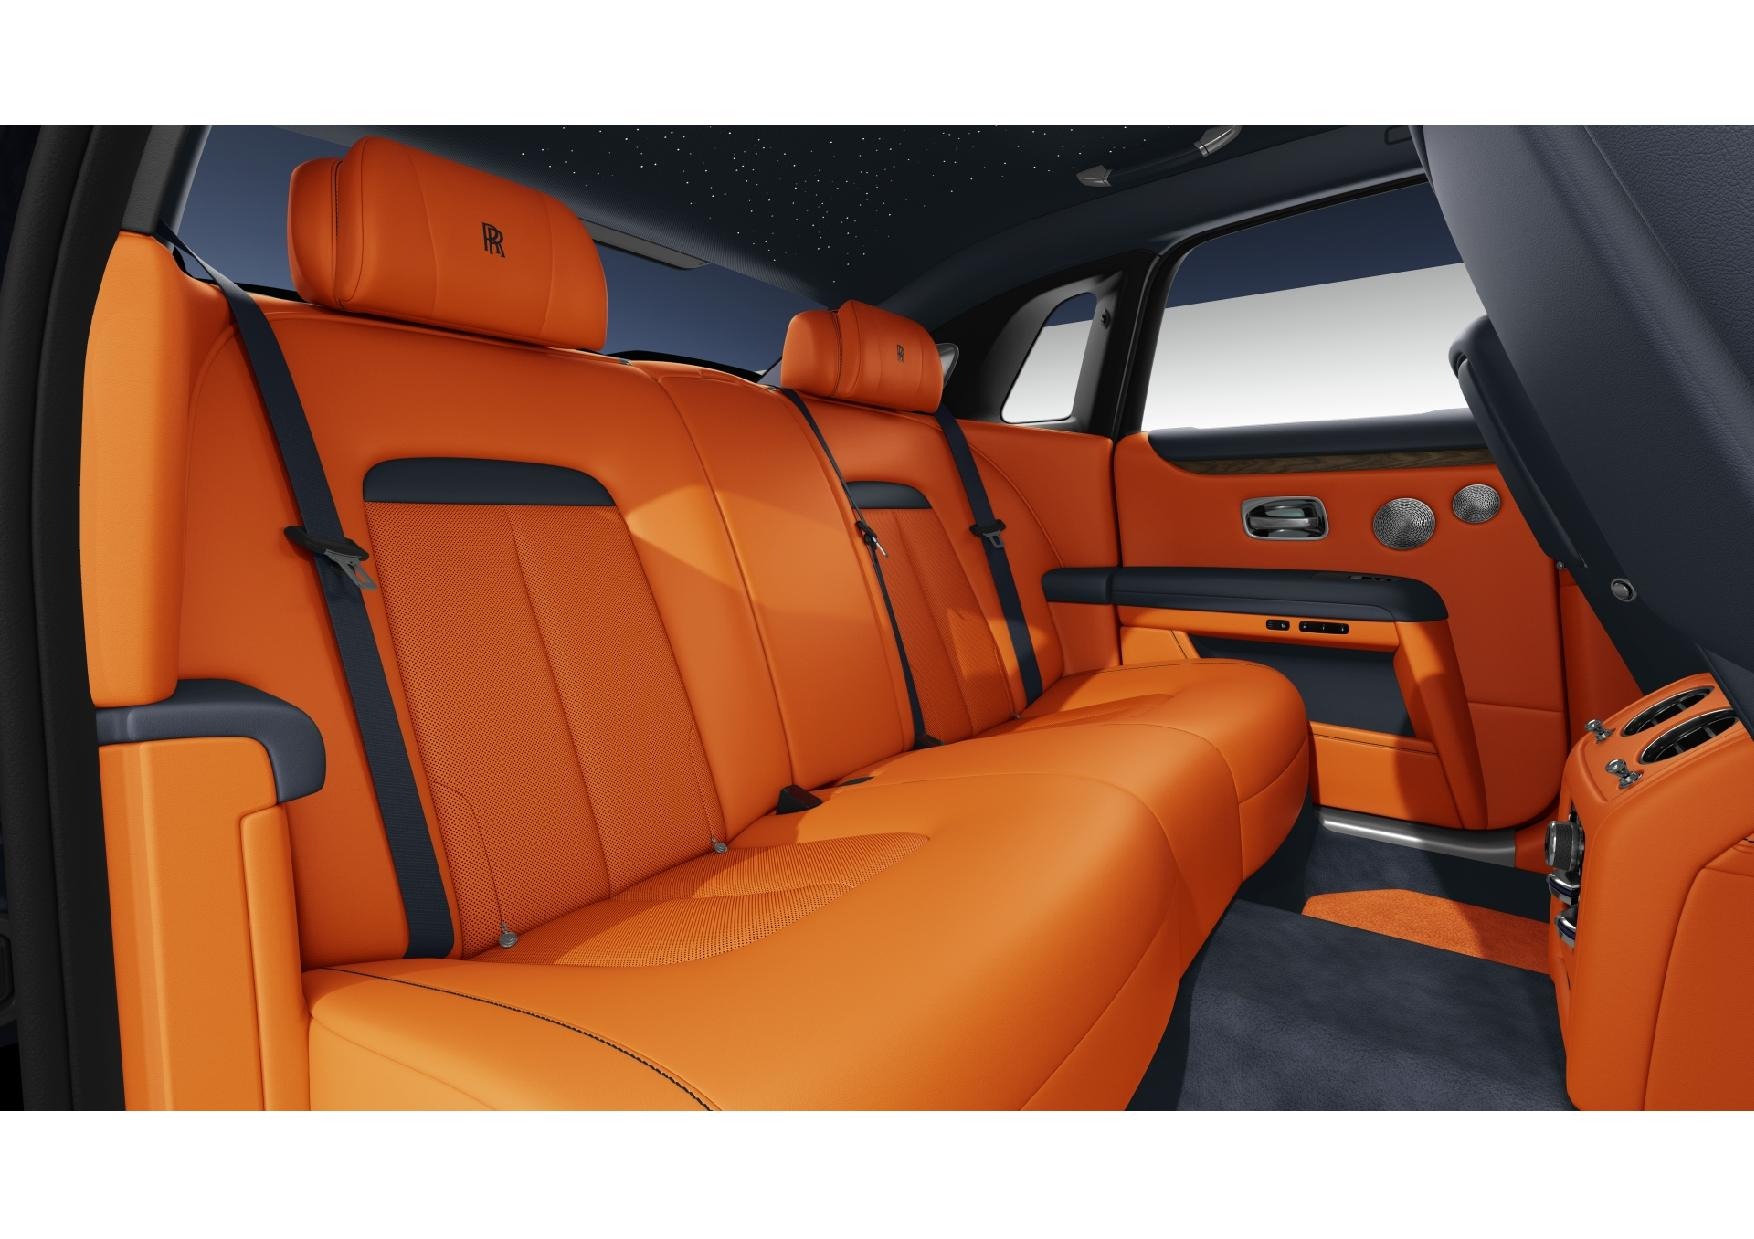 2023 Rolls-Royce Ghost Lease (Monthly Leasing Deals & Specials) · NY, NJ,  PA, CT